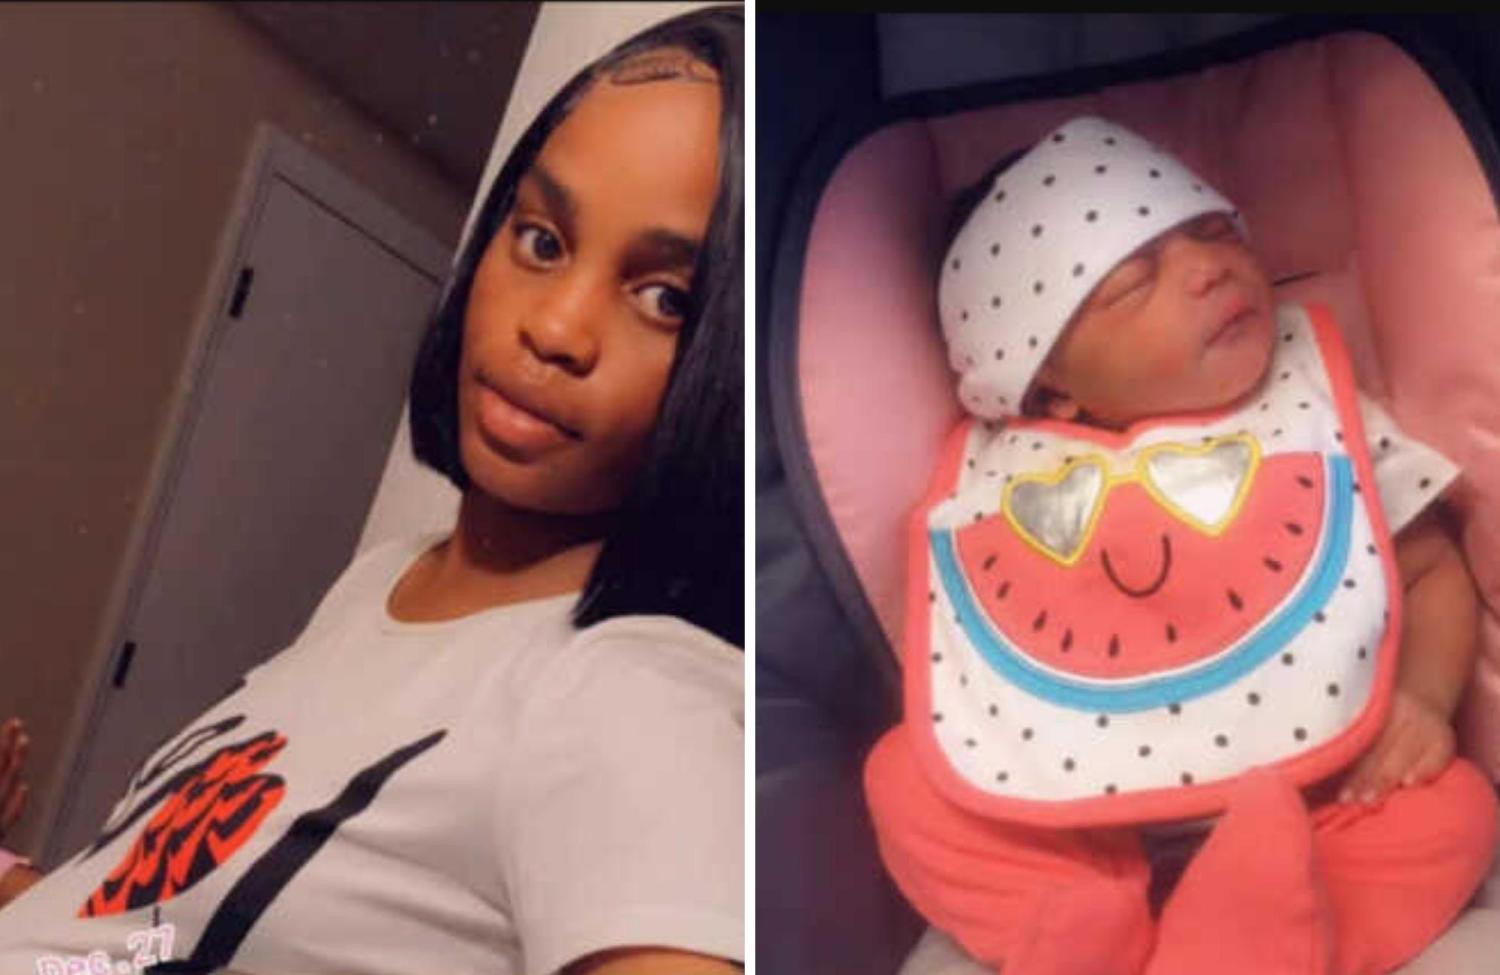 Missing Newborn's Dad Says He Threw Her In River After Luring Baby's Mother To Her Death: Police